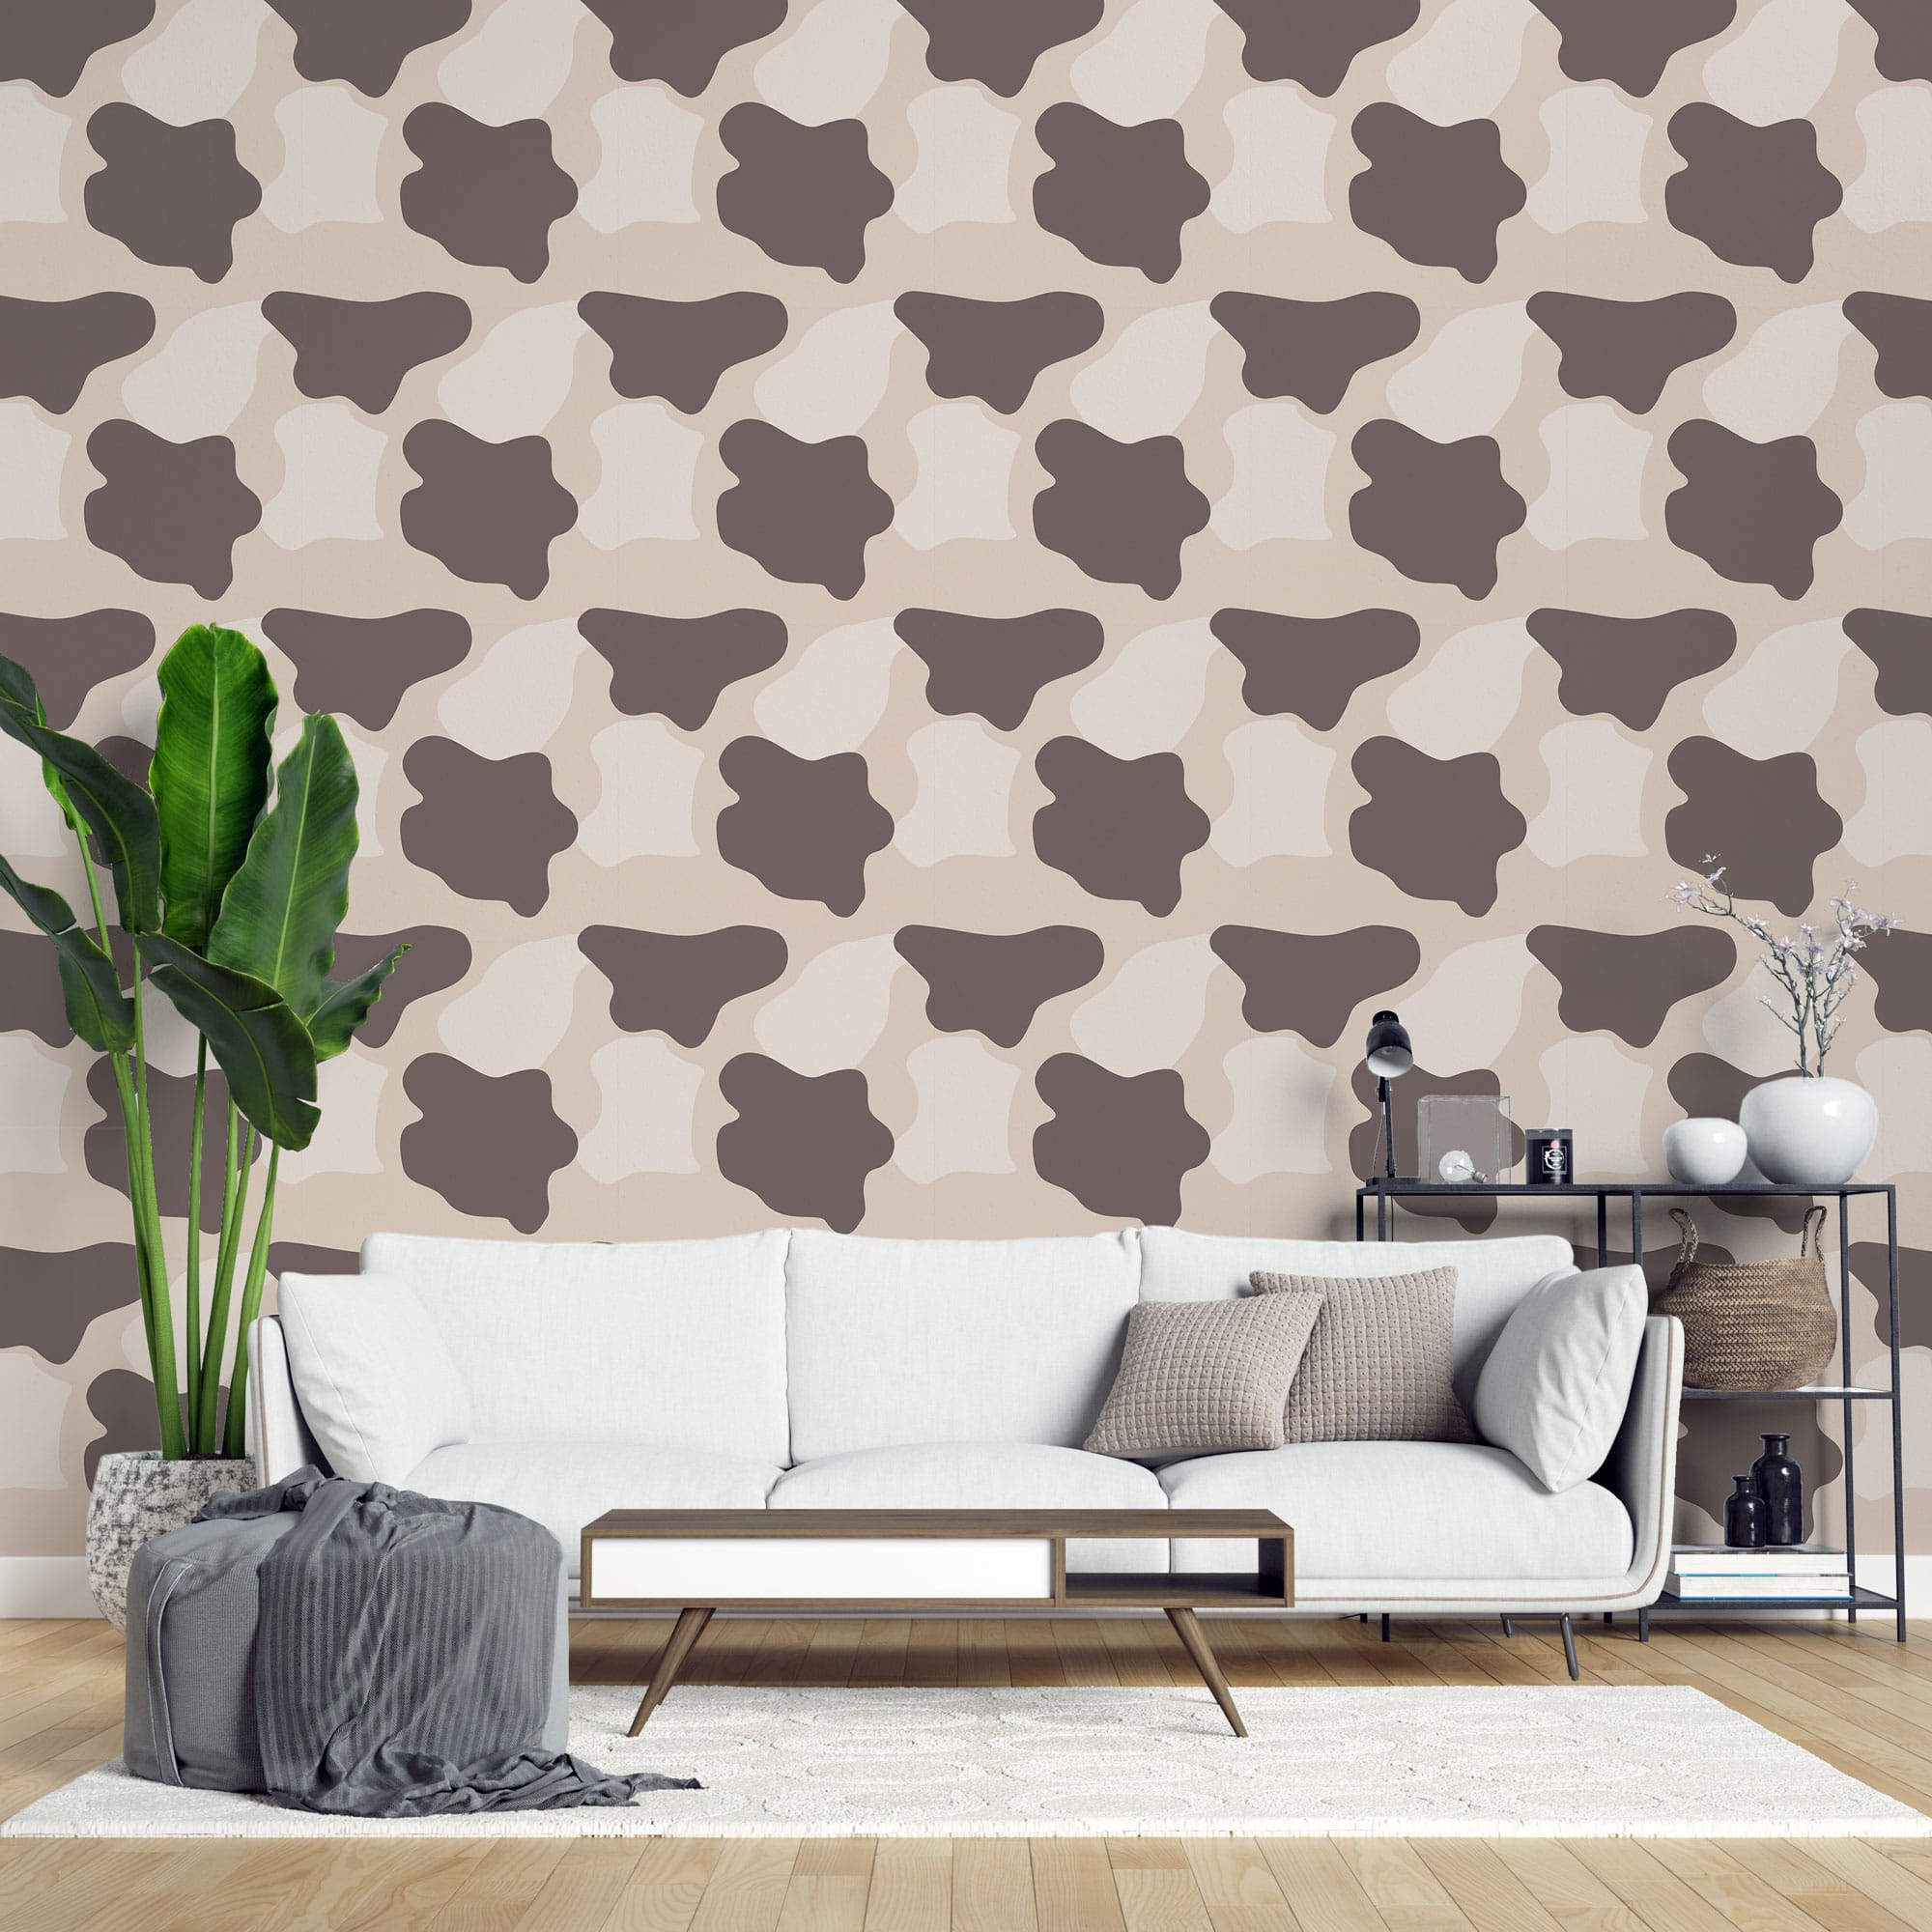 Brown cow print wallpaper - Peel and Stick or Non-Pasted